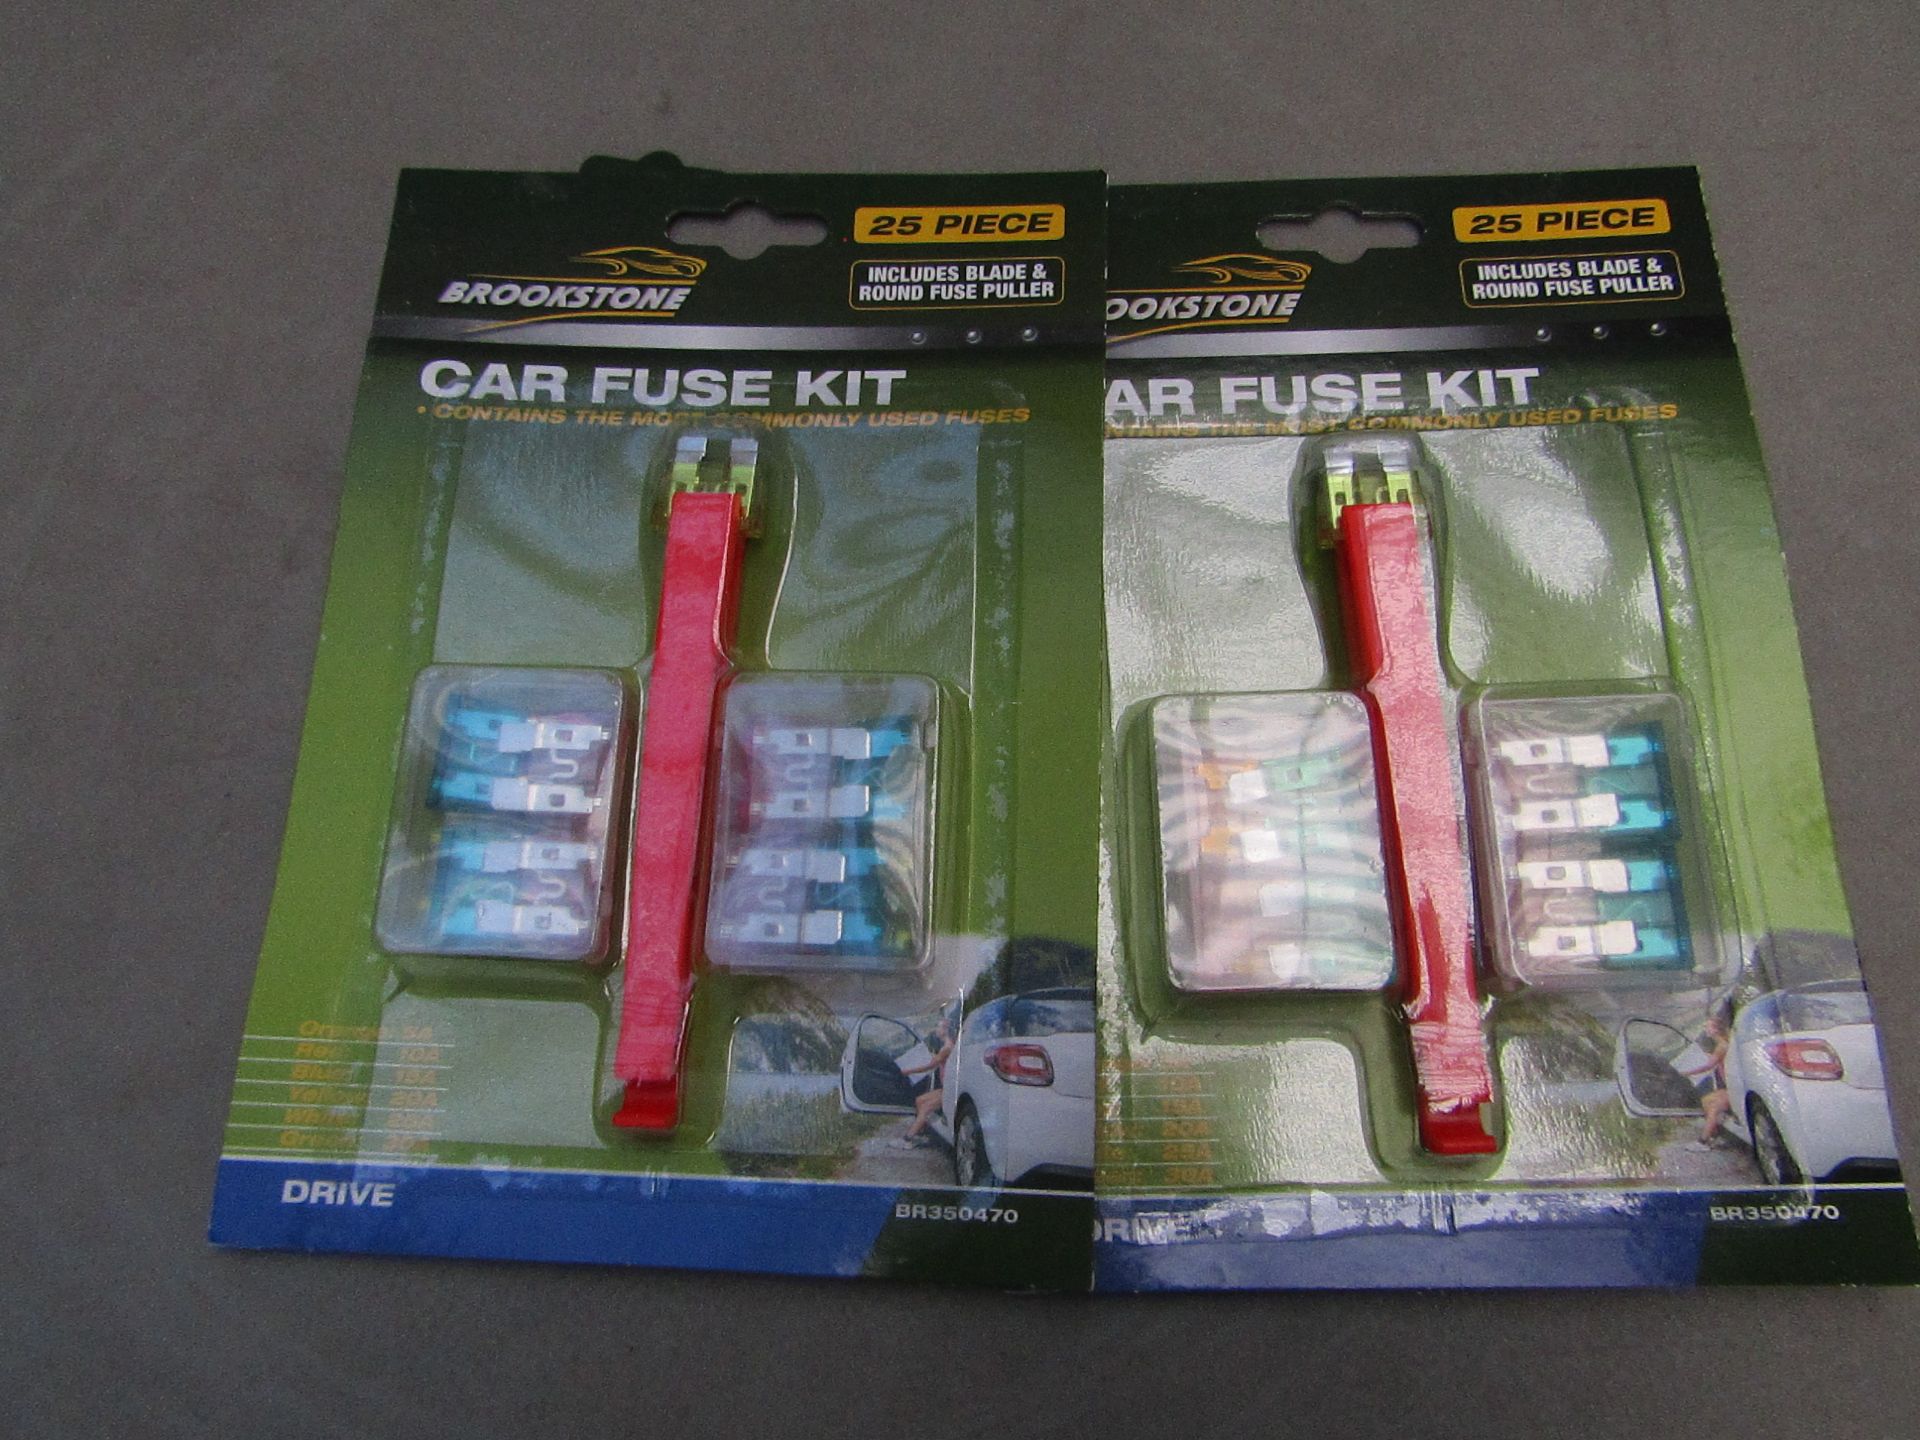 2x Brookstone - 25 Pc Car Blade Fuse Kit - New & Packaged.